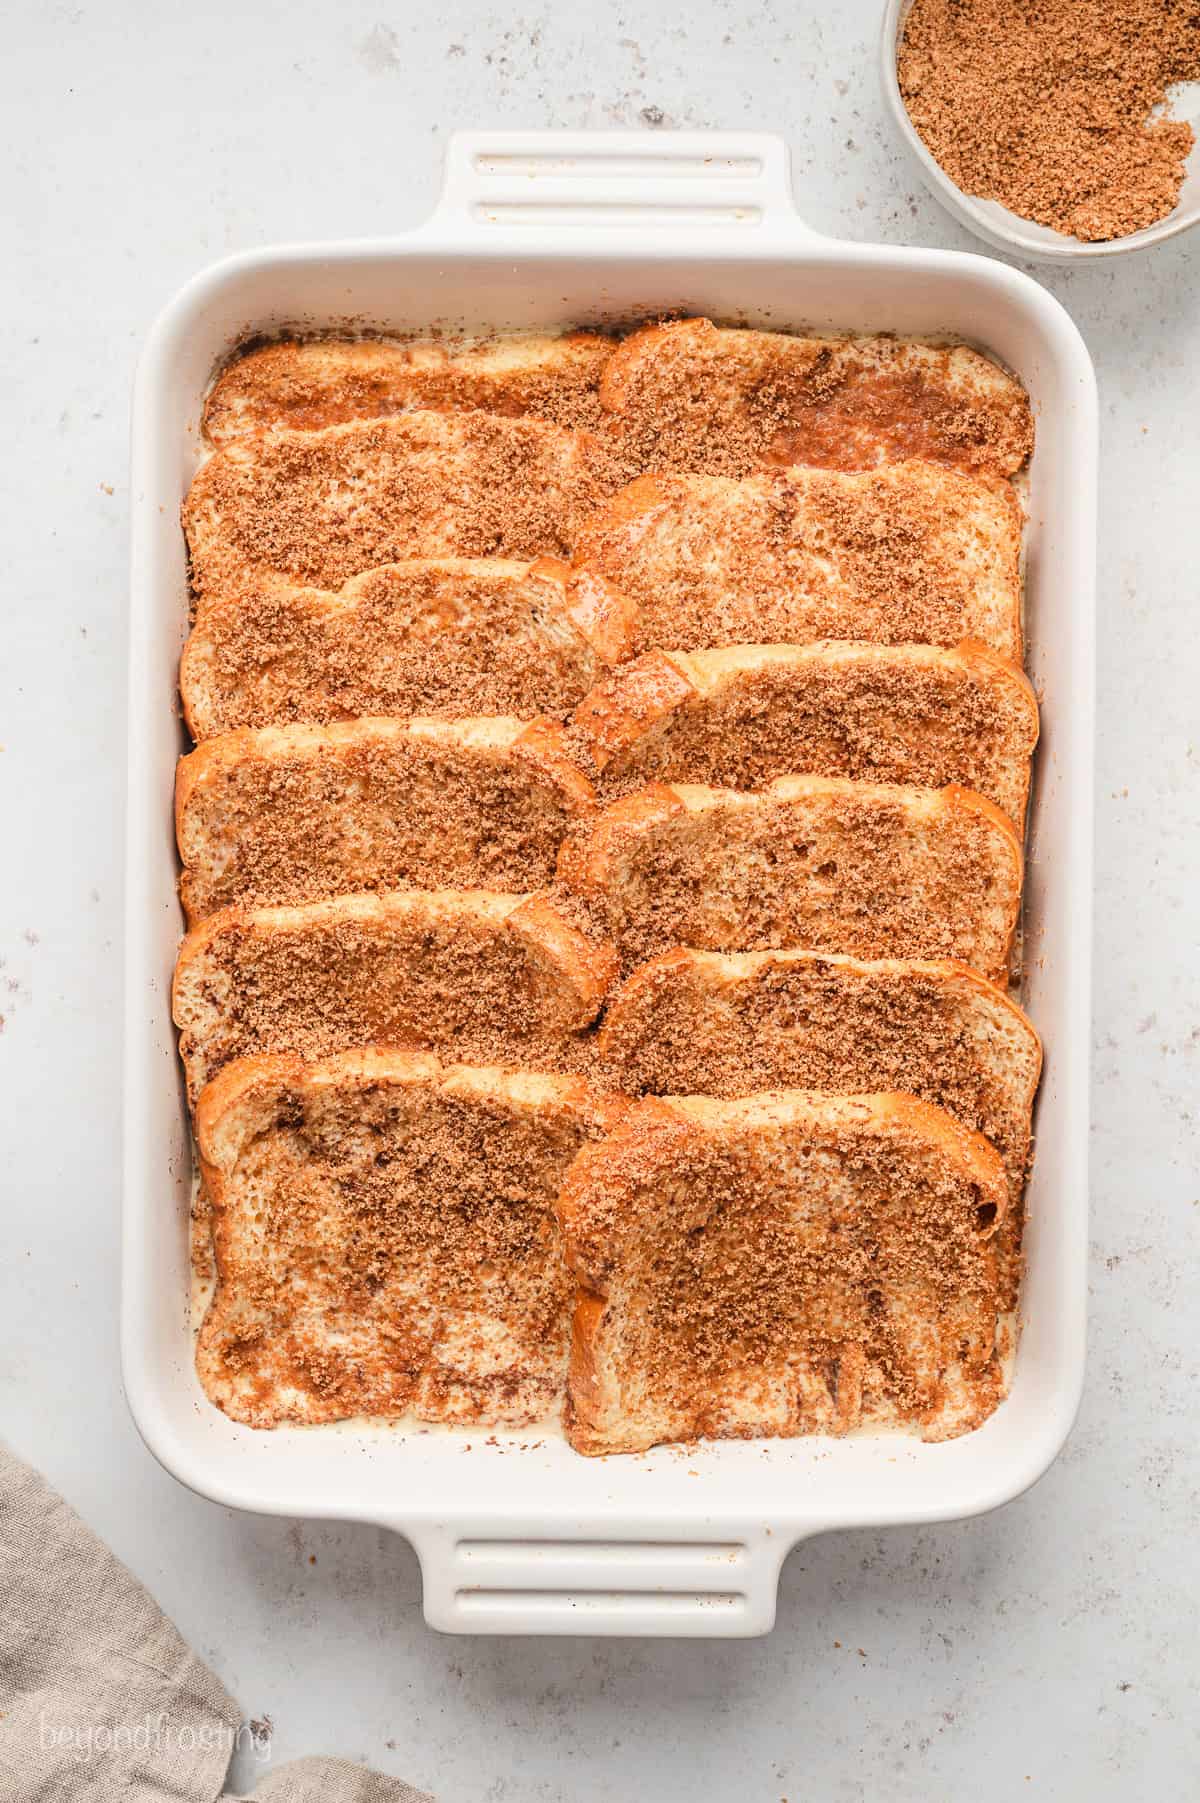 Assembled, unbaked brioche French toast casserole in a baking dish.